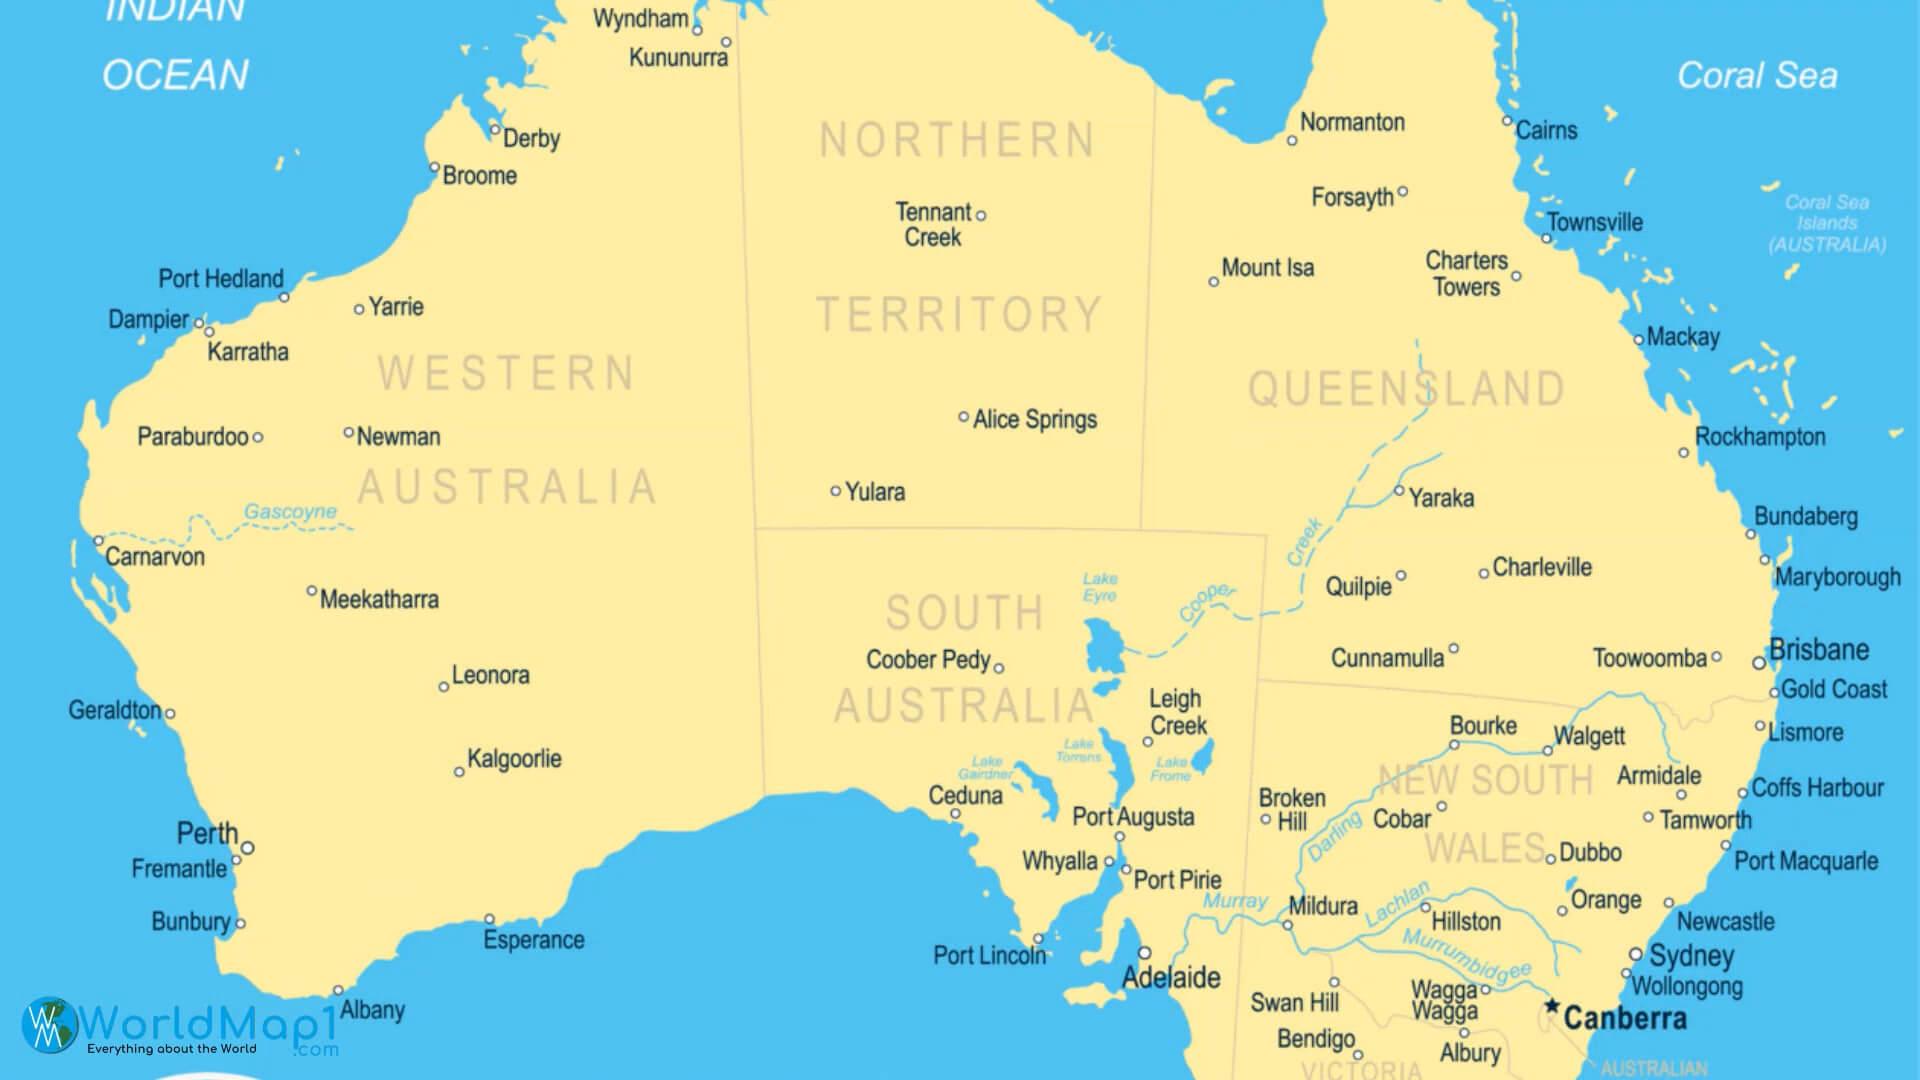 Indian Ocean and Coral Sea with Australia Map